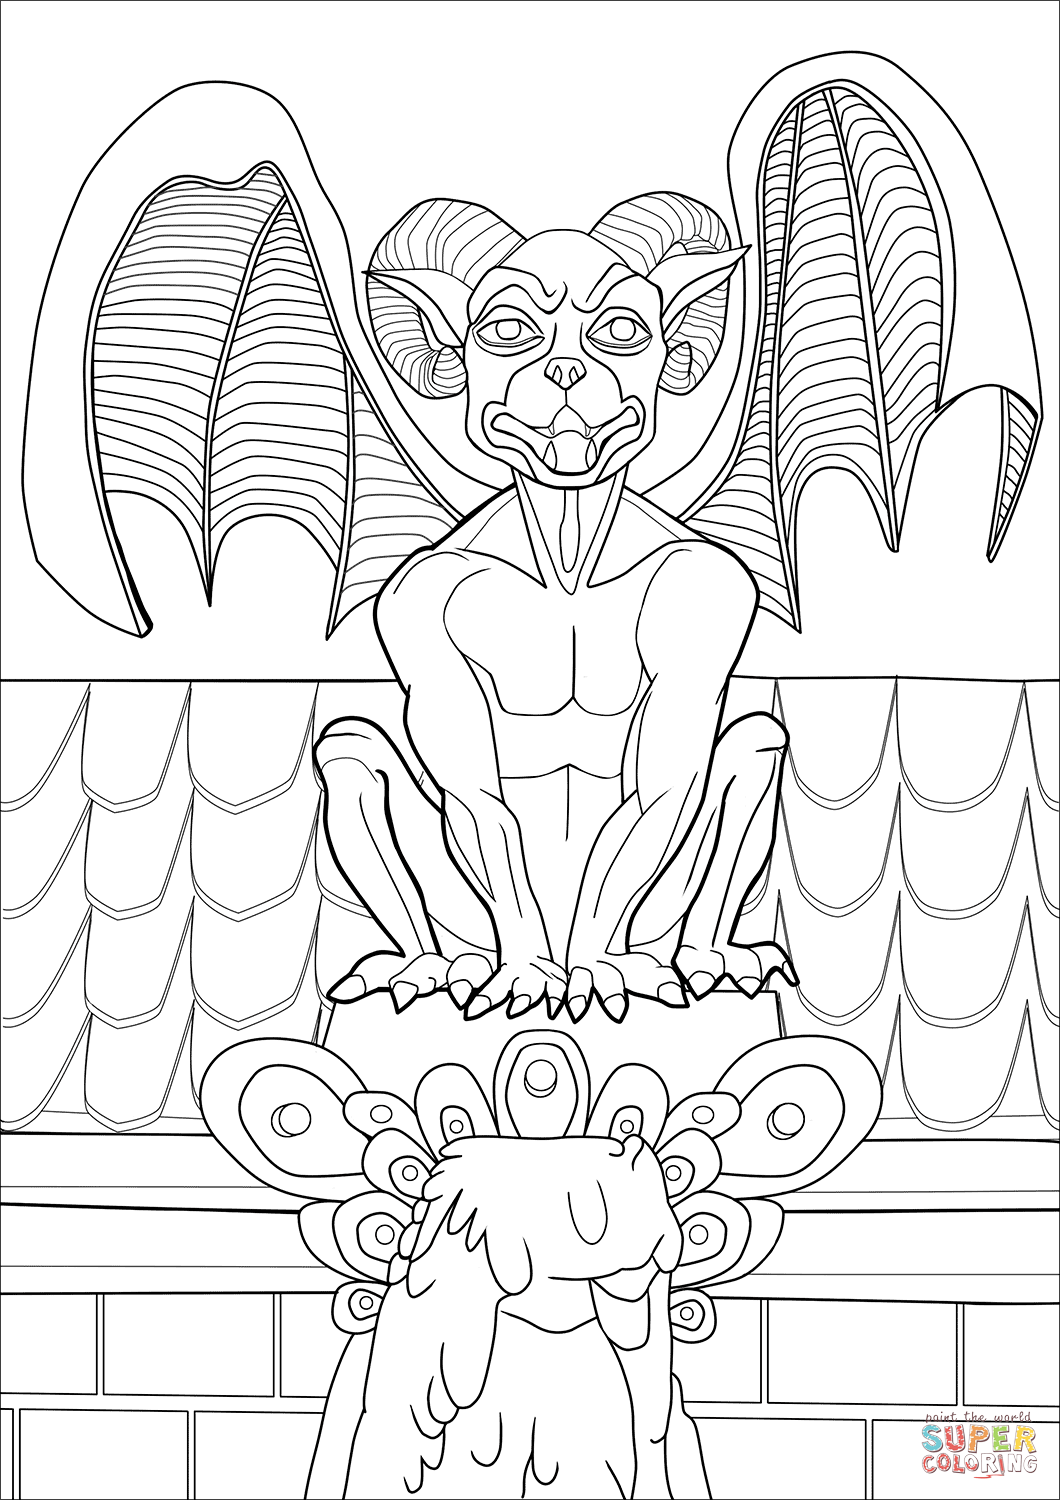 Gargoyle coloring page | Free Printable Coloring Pages